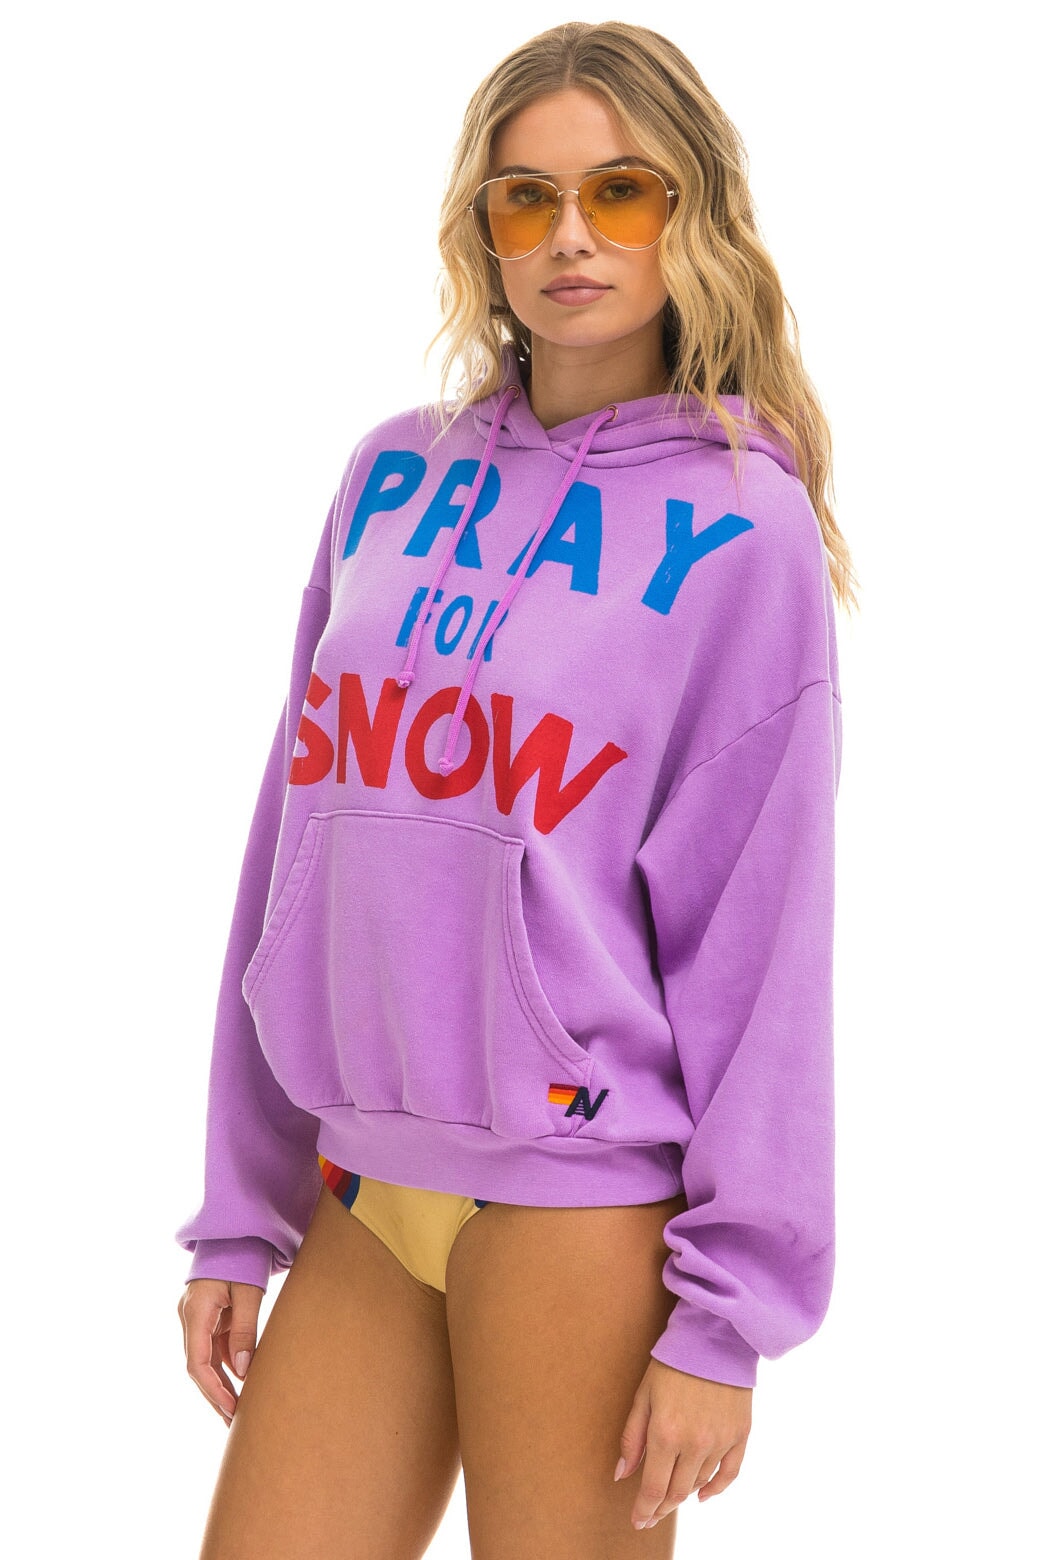 PRAY FOR SNOW RELAXED PULLOVER HOODIE - NEON PURPLE - Aviator Nation